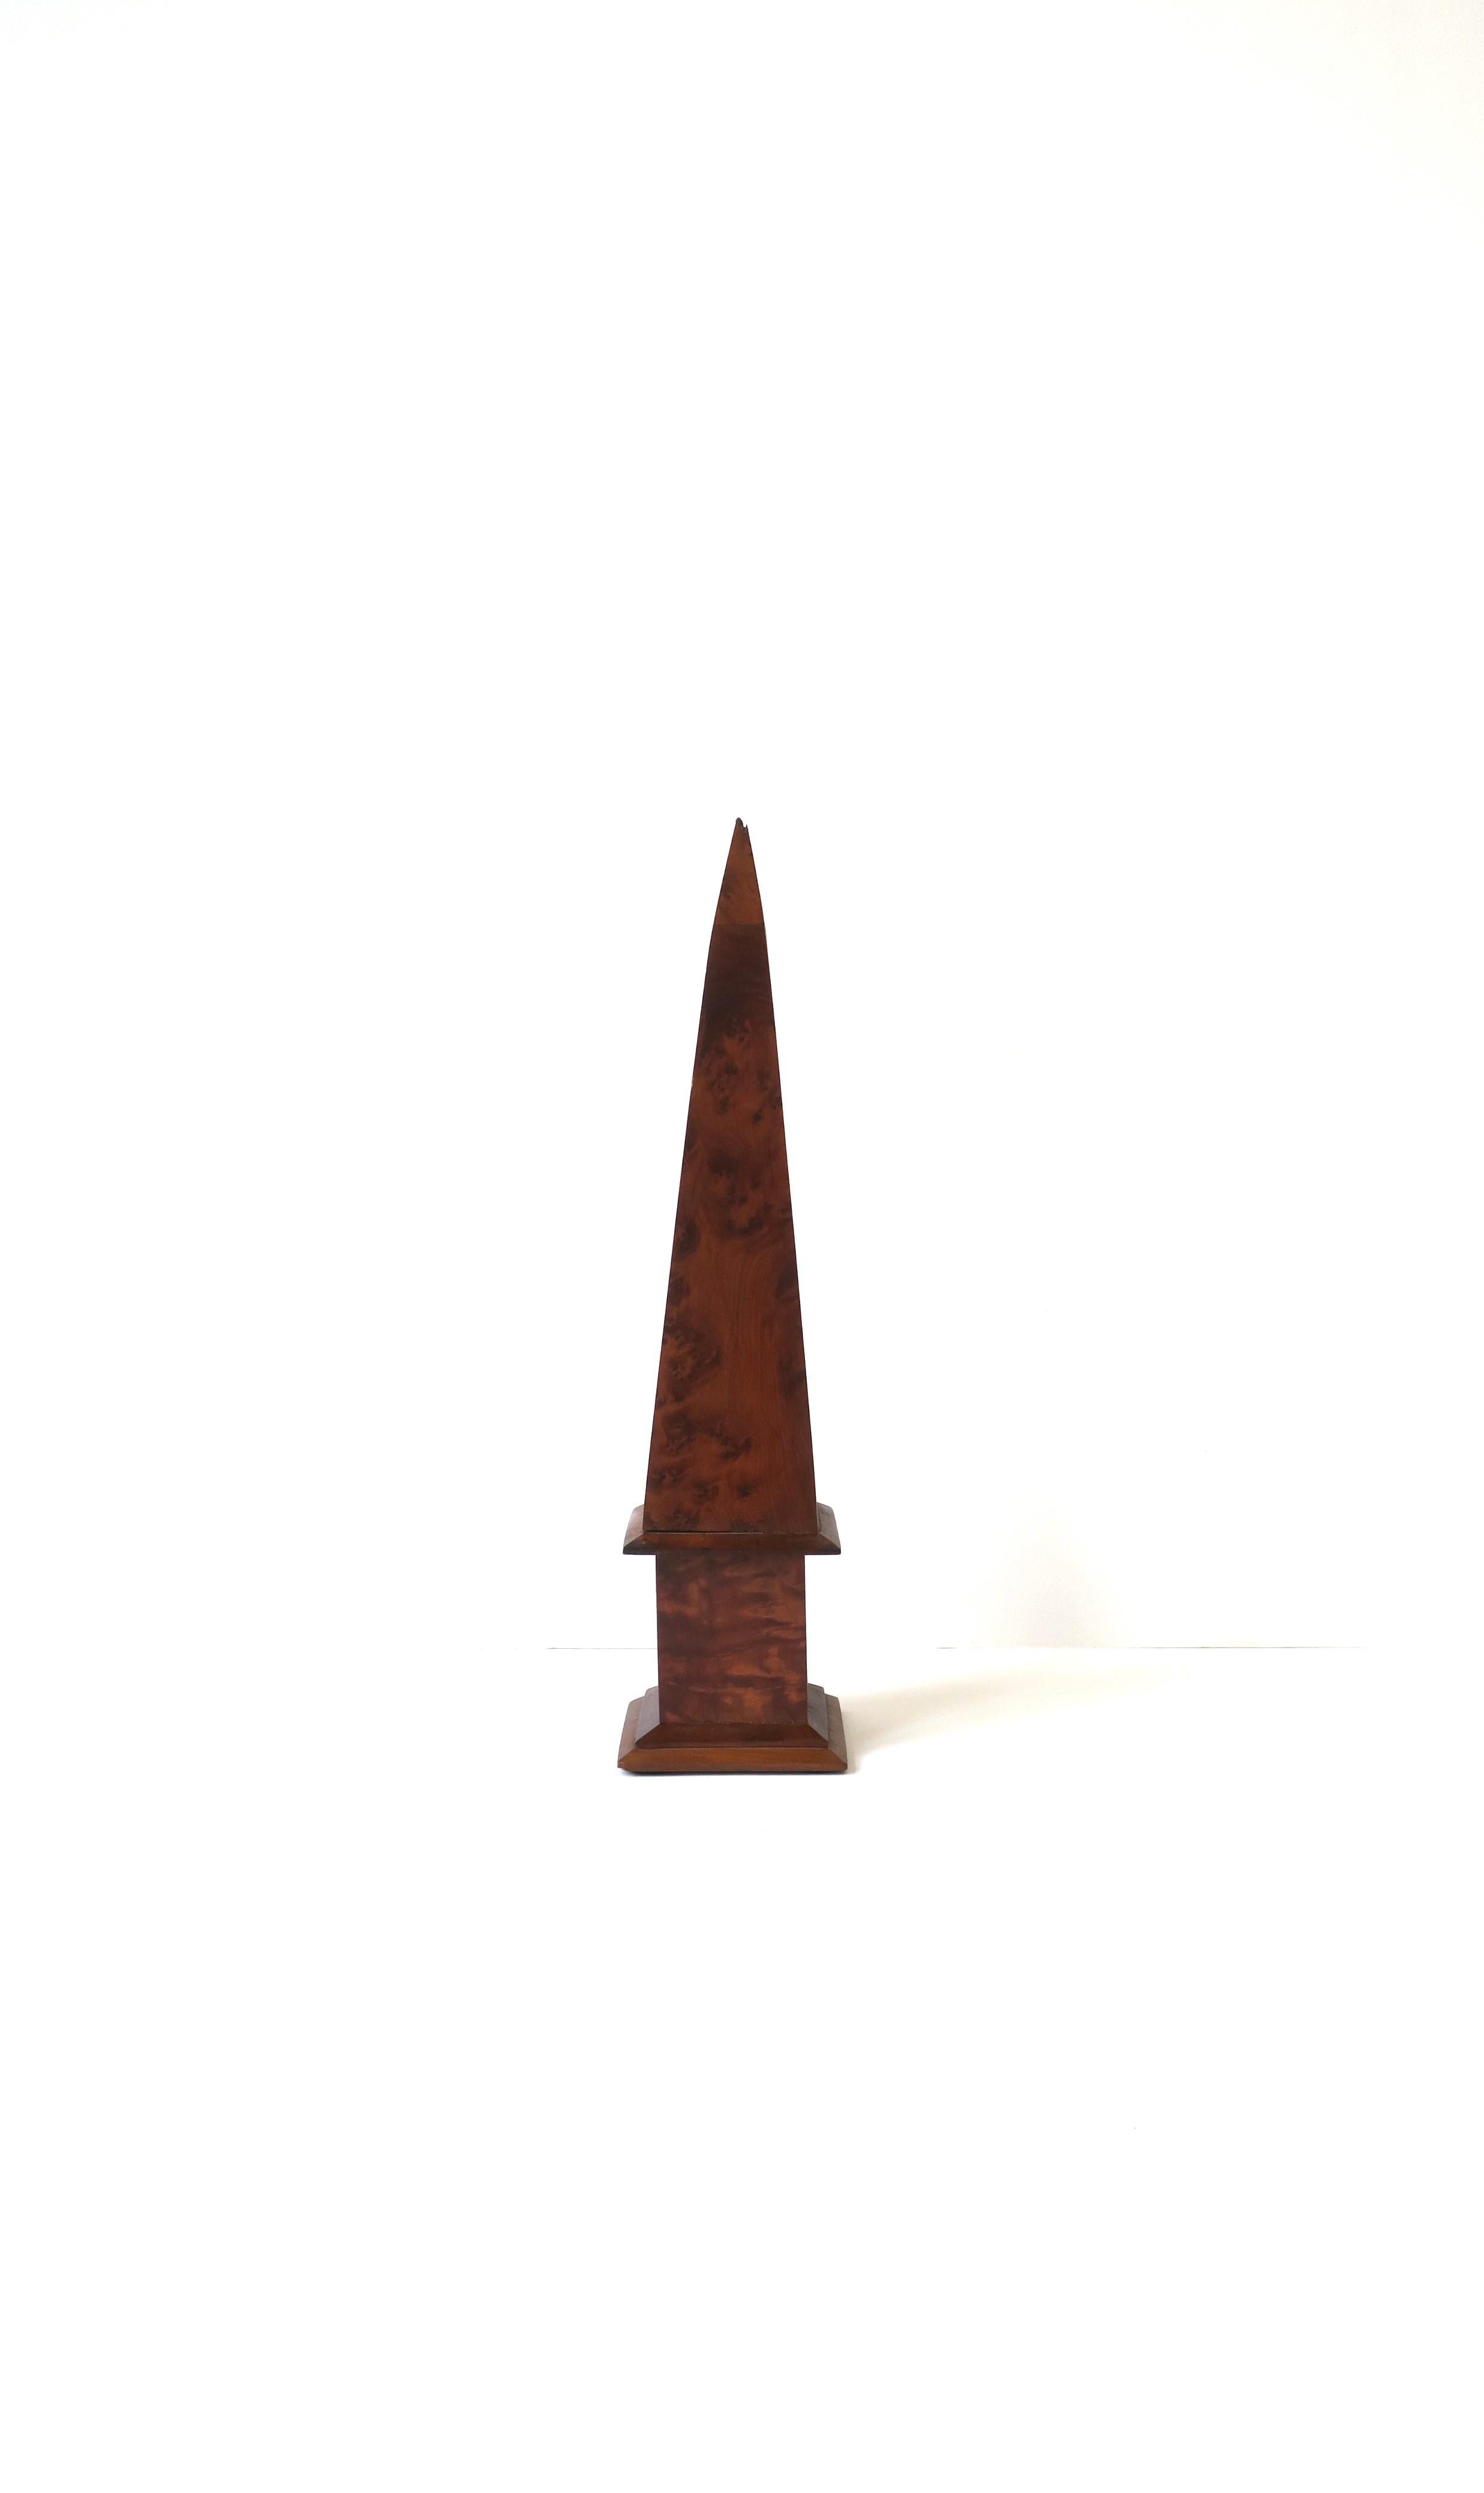 A brown burl wood obelisk, circa early-20th century, England. Obelisk is hand-crafted in a rich brown burl. A beautiful decorative object for a bookshelf, office, desk, etc. Dimensions: 12.32